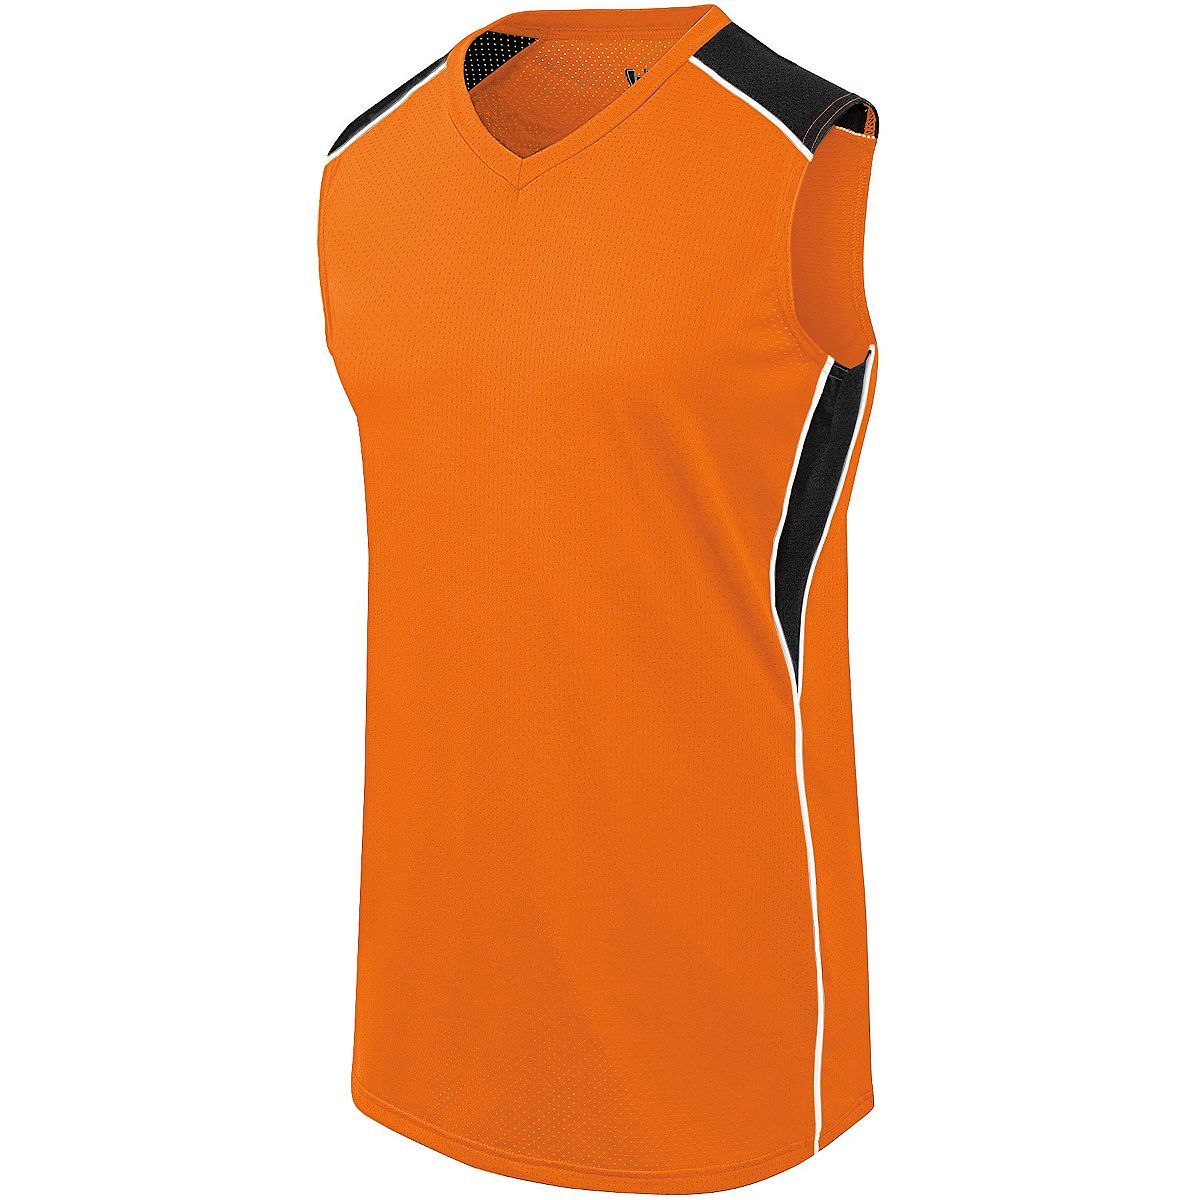 Augusta Sportswear Girls Dynamite Jersey in Orange/Black/White  -Part of the Girls, Augusta-Products, Softball, Girls-Jersey, Shirts product lines at KanaleyCreations.com